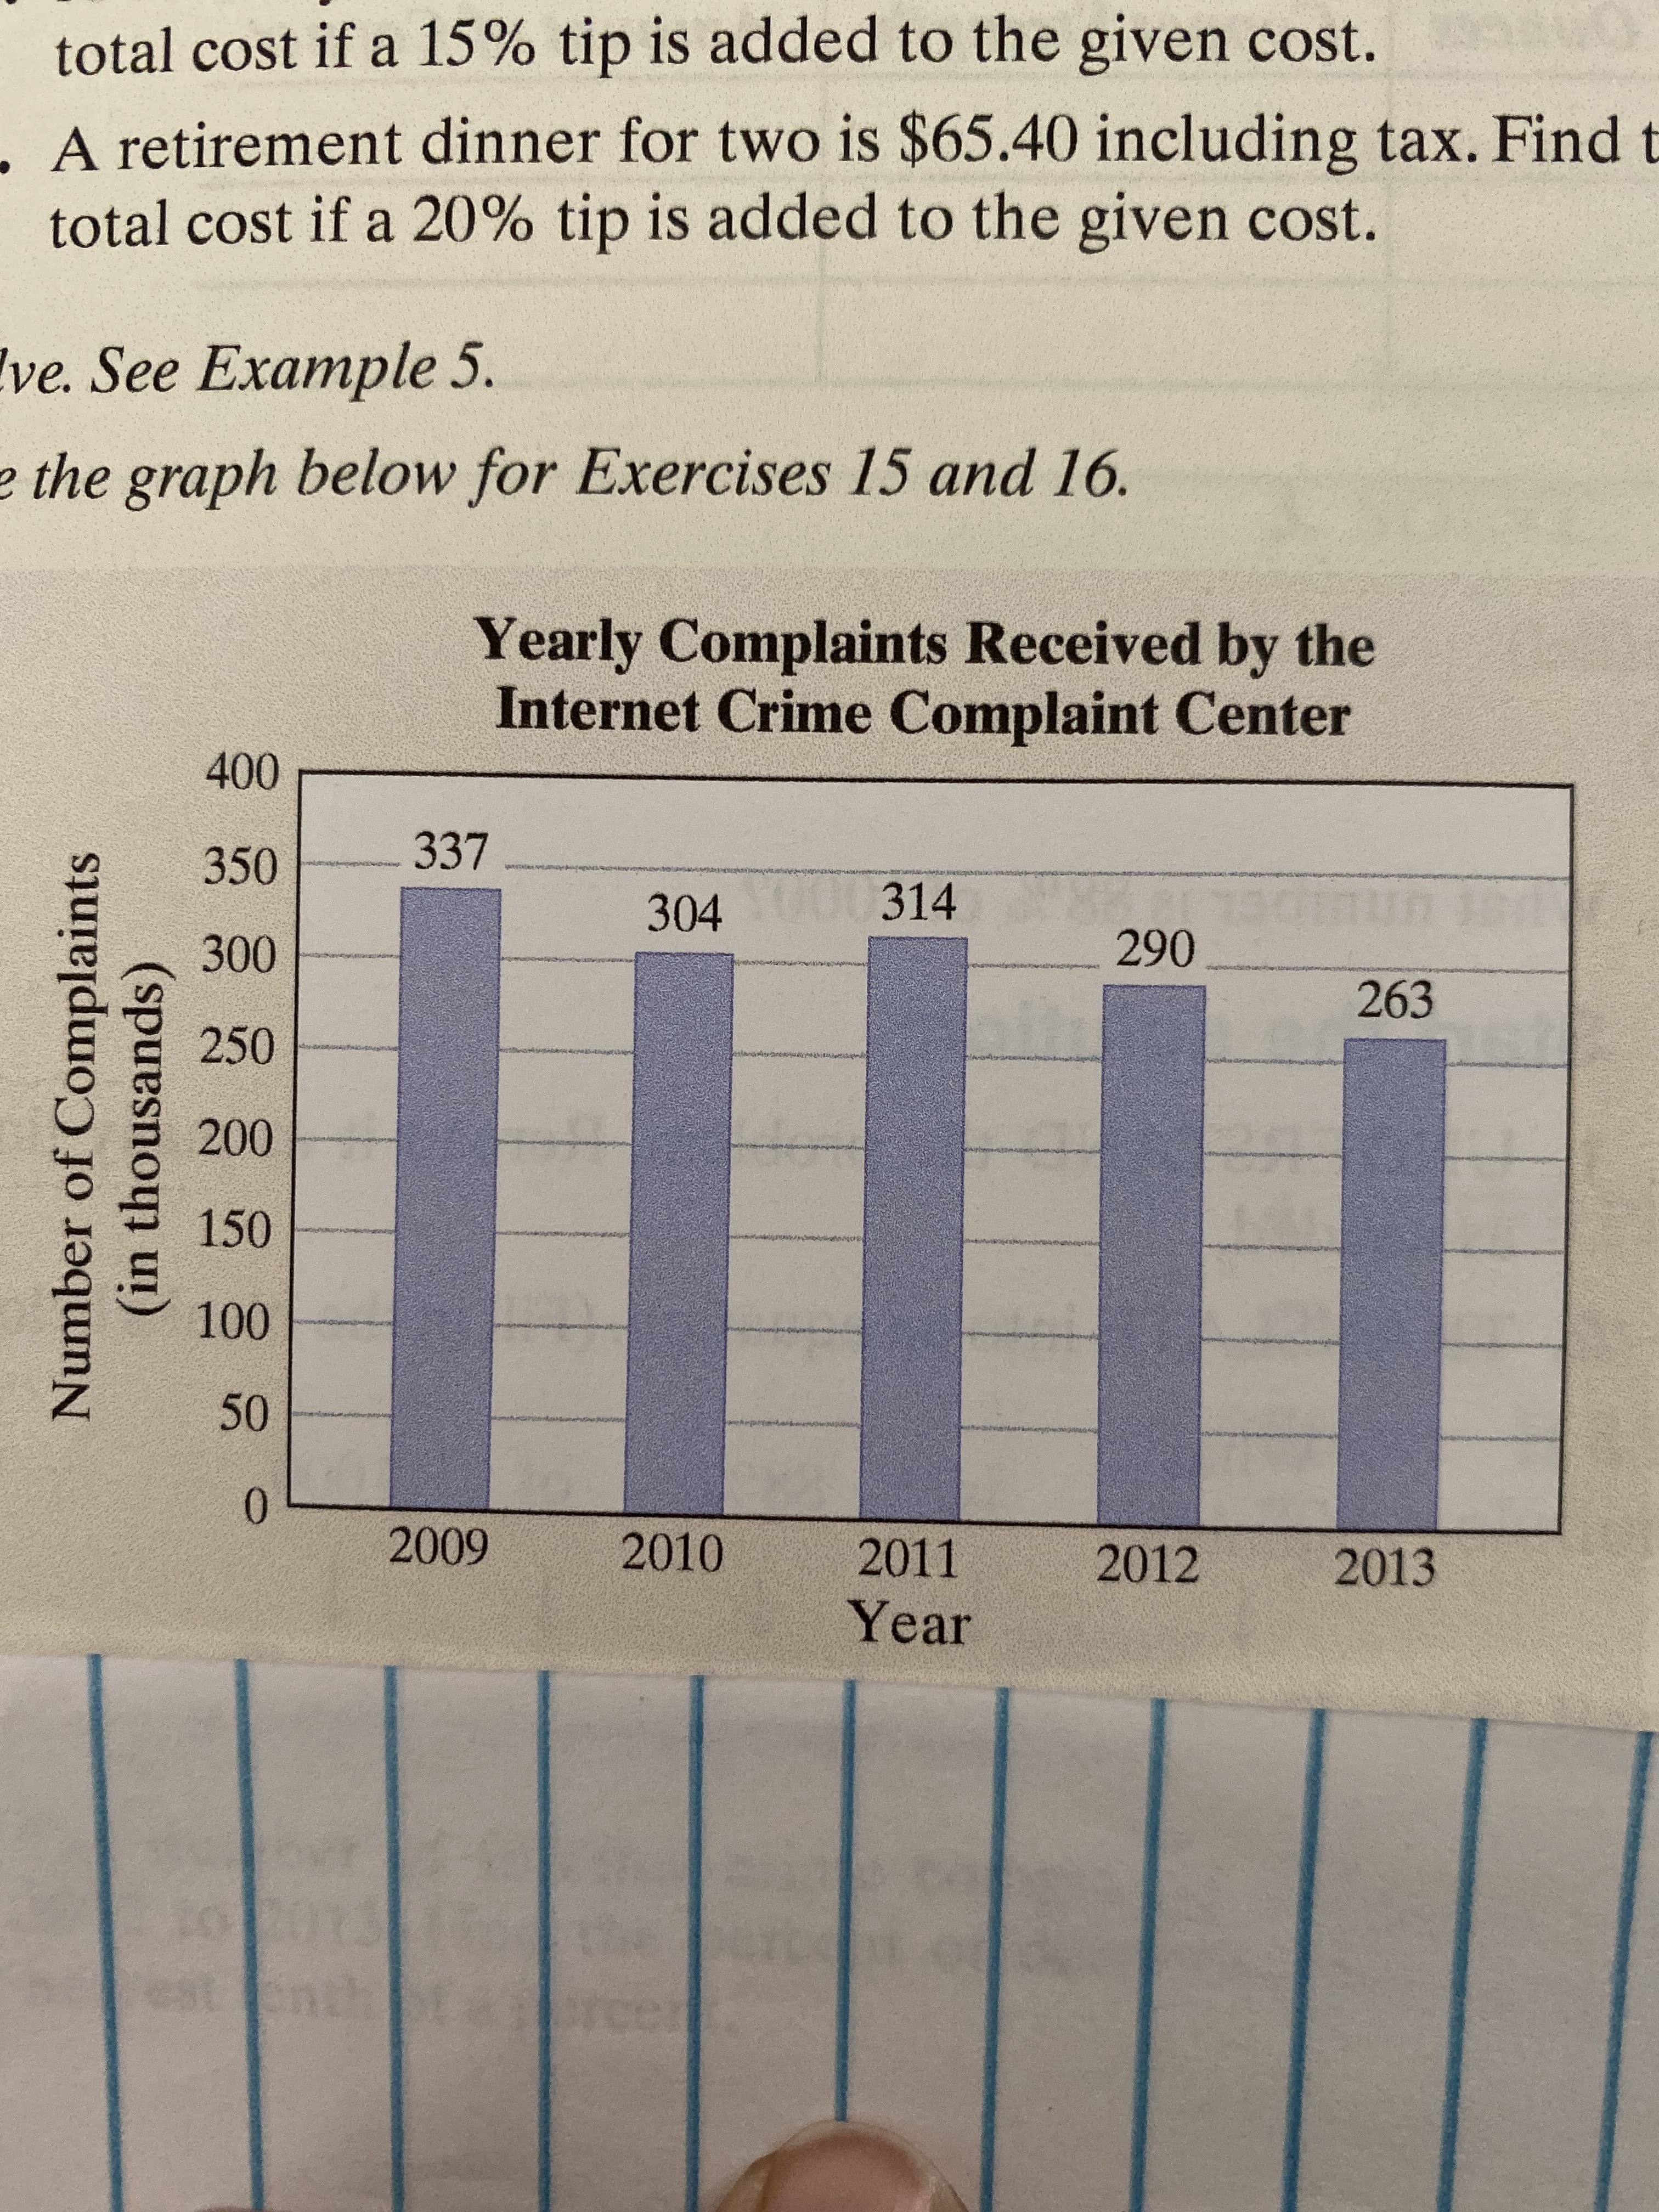 total cost if a 15% tip is added to the given cost.
A retirement dinner for two is $65.40 including tax. Findt
total cost if a 20 % tip is added to the given cost.
ve. See Example 5.
2 the graph below for Exercises 15 and 16.
Yearly Complaints Received by the
Internet Crime Complaint Center
400
337
350
900U
290
304 314
300
263
250
200
150
100
50
0
2009
2010
2011
2012
2013
Year
10
Number of Complaints
(in thousands)
